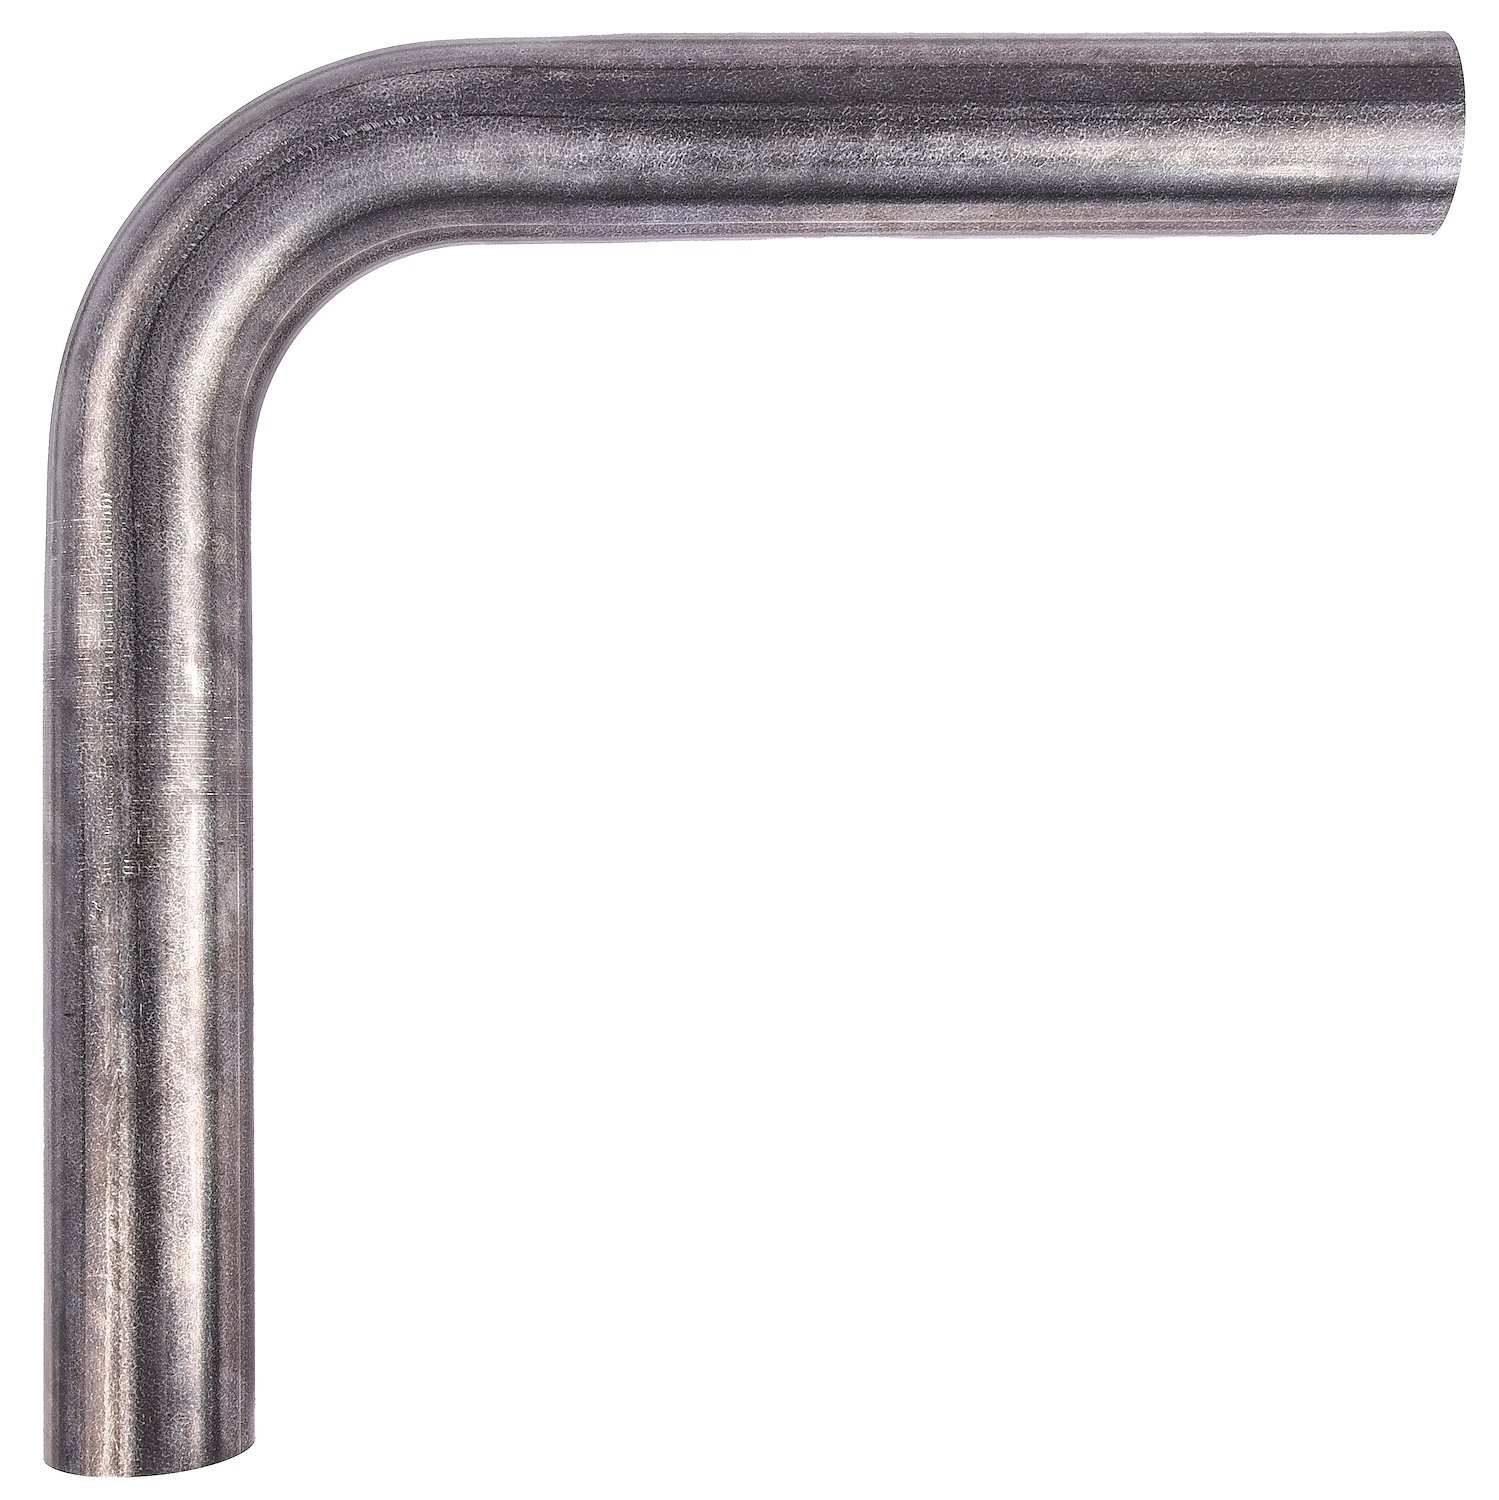 Exhaust Elbow Aluminized Steel [90-Degree Bend, 2.500 in. Outer Diameter]